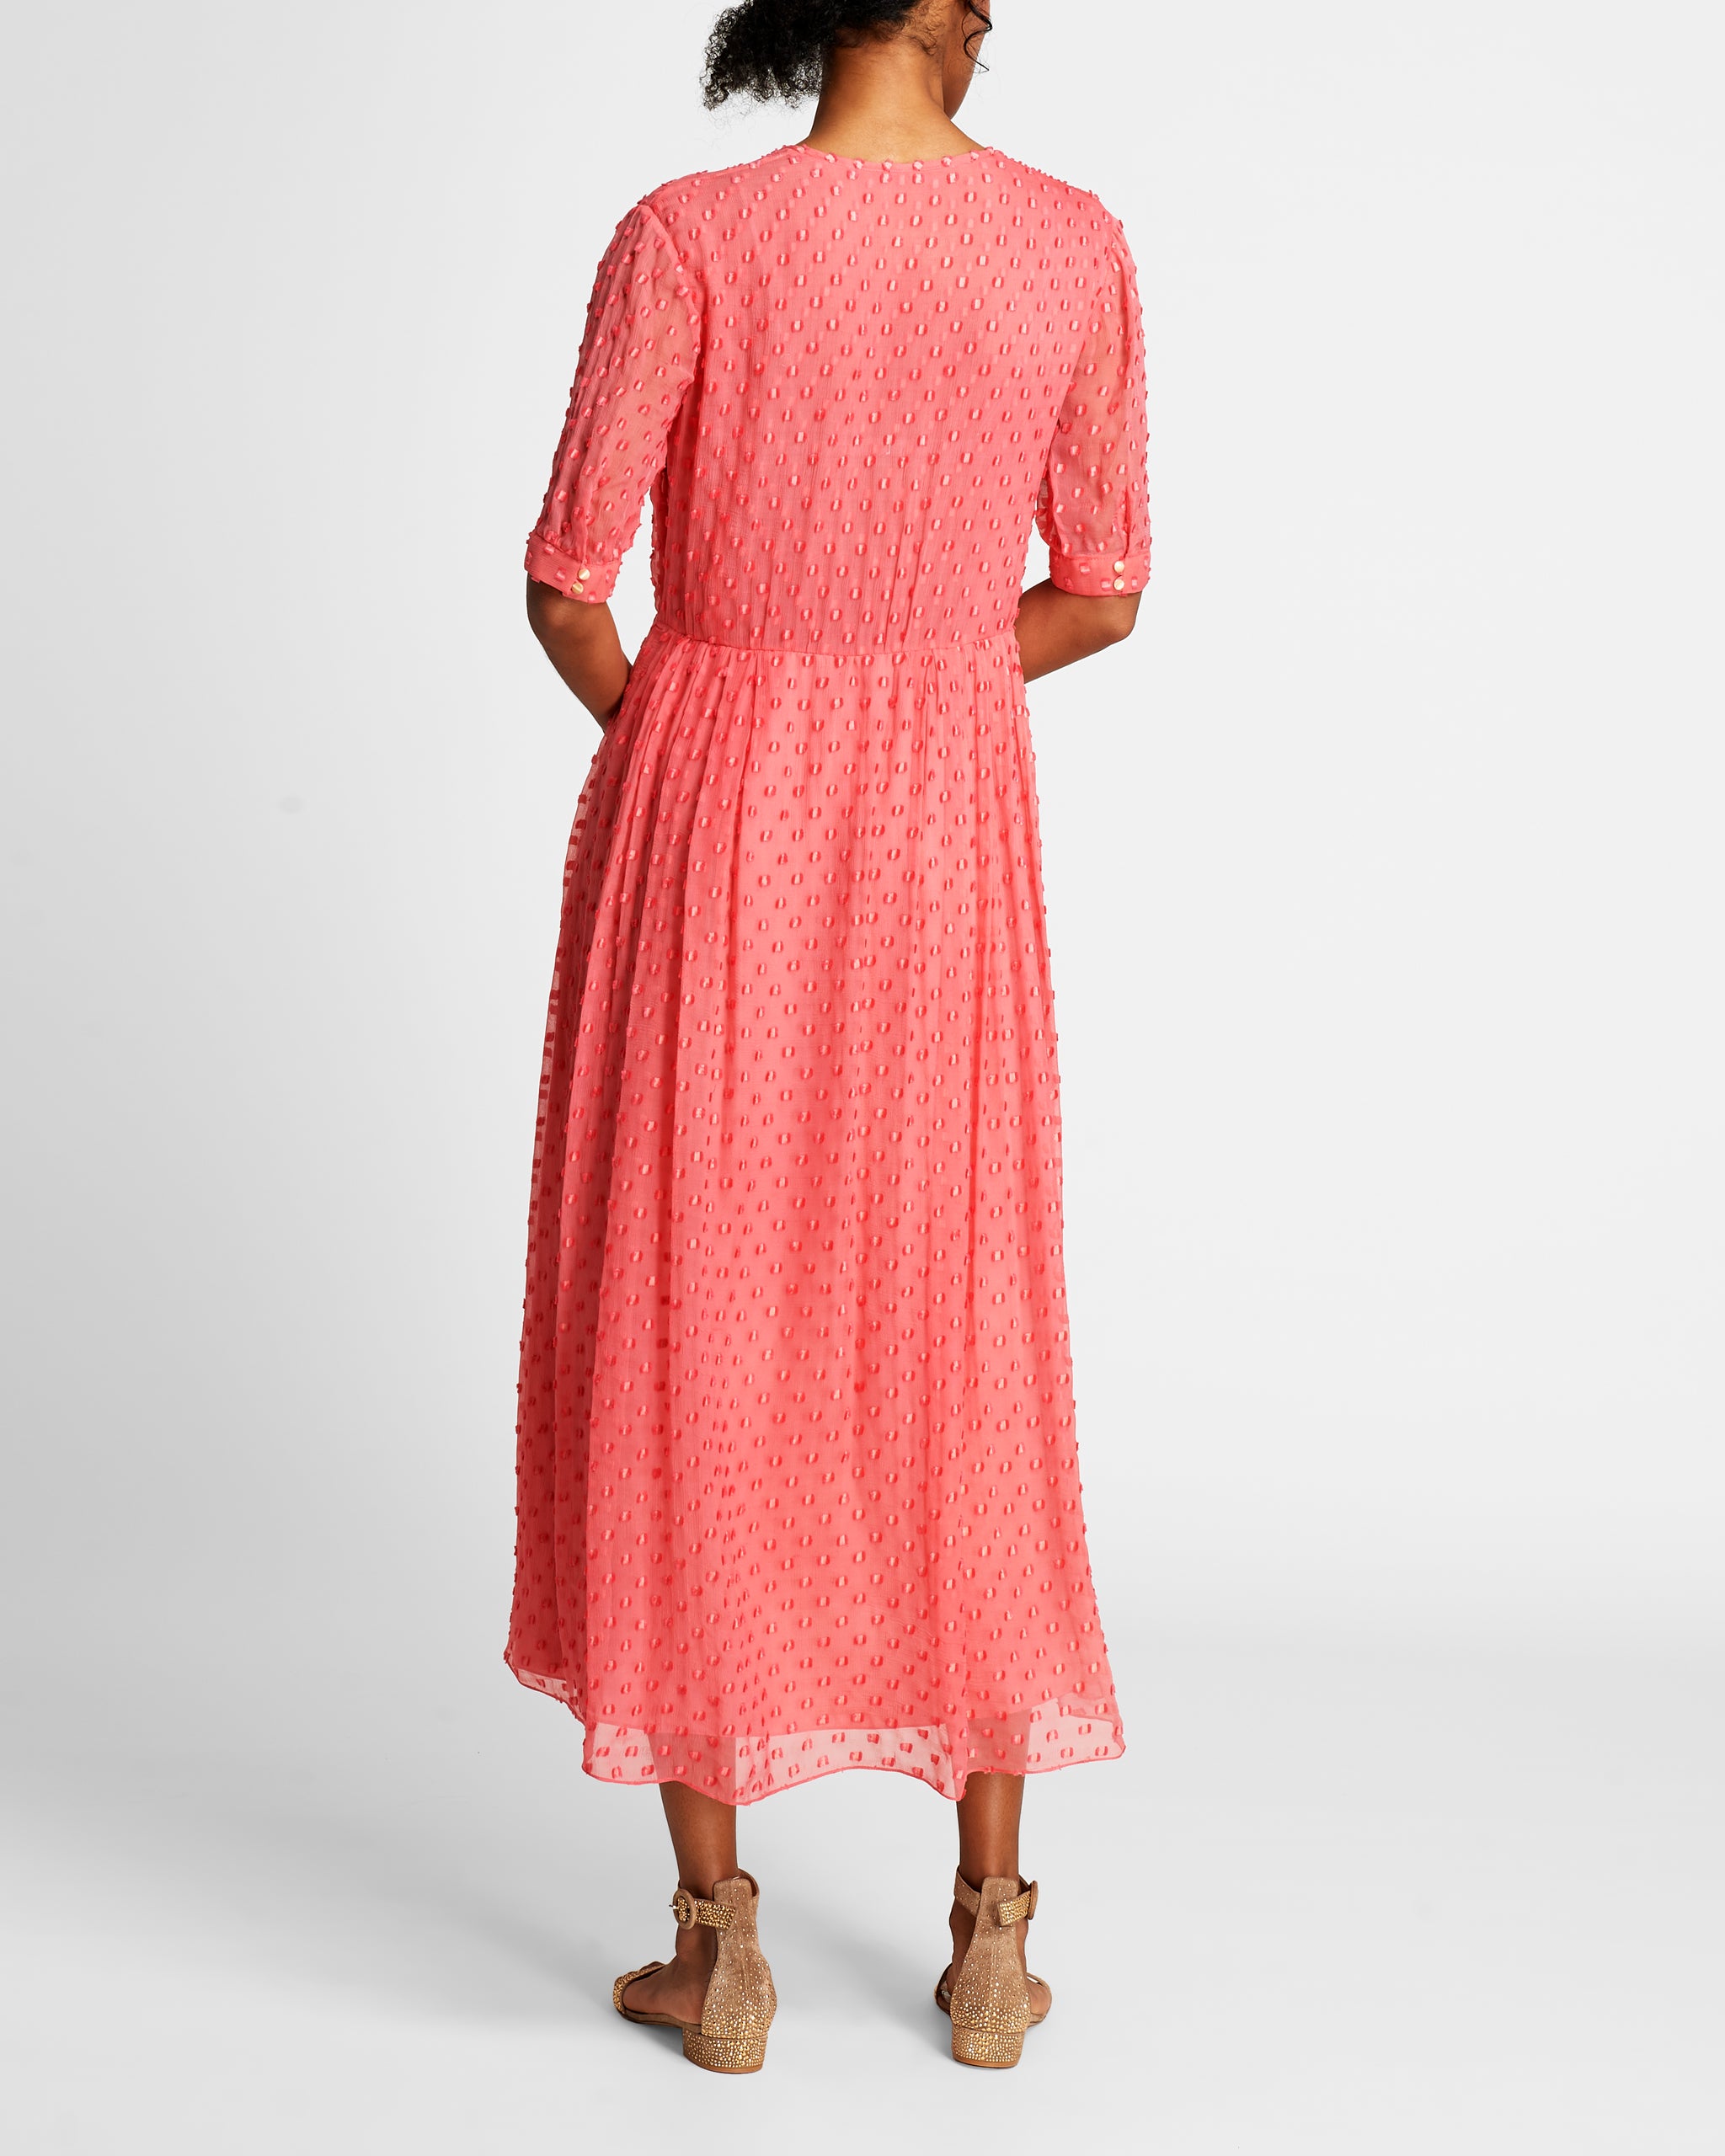 The Ivy Dress | Coral